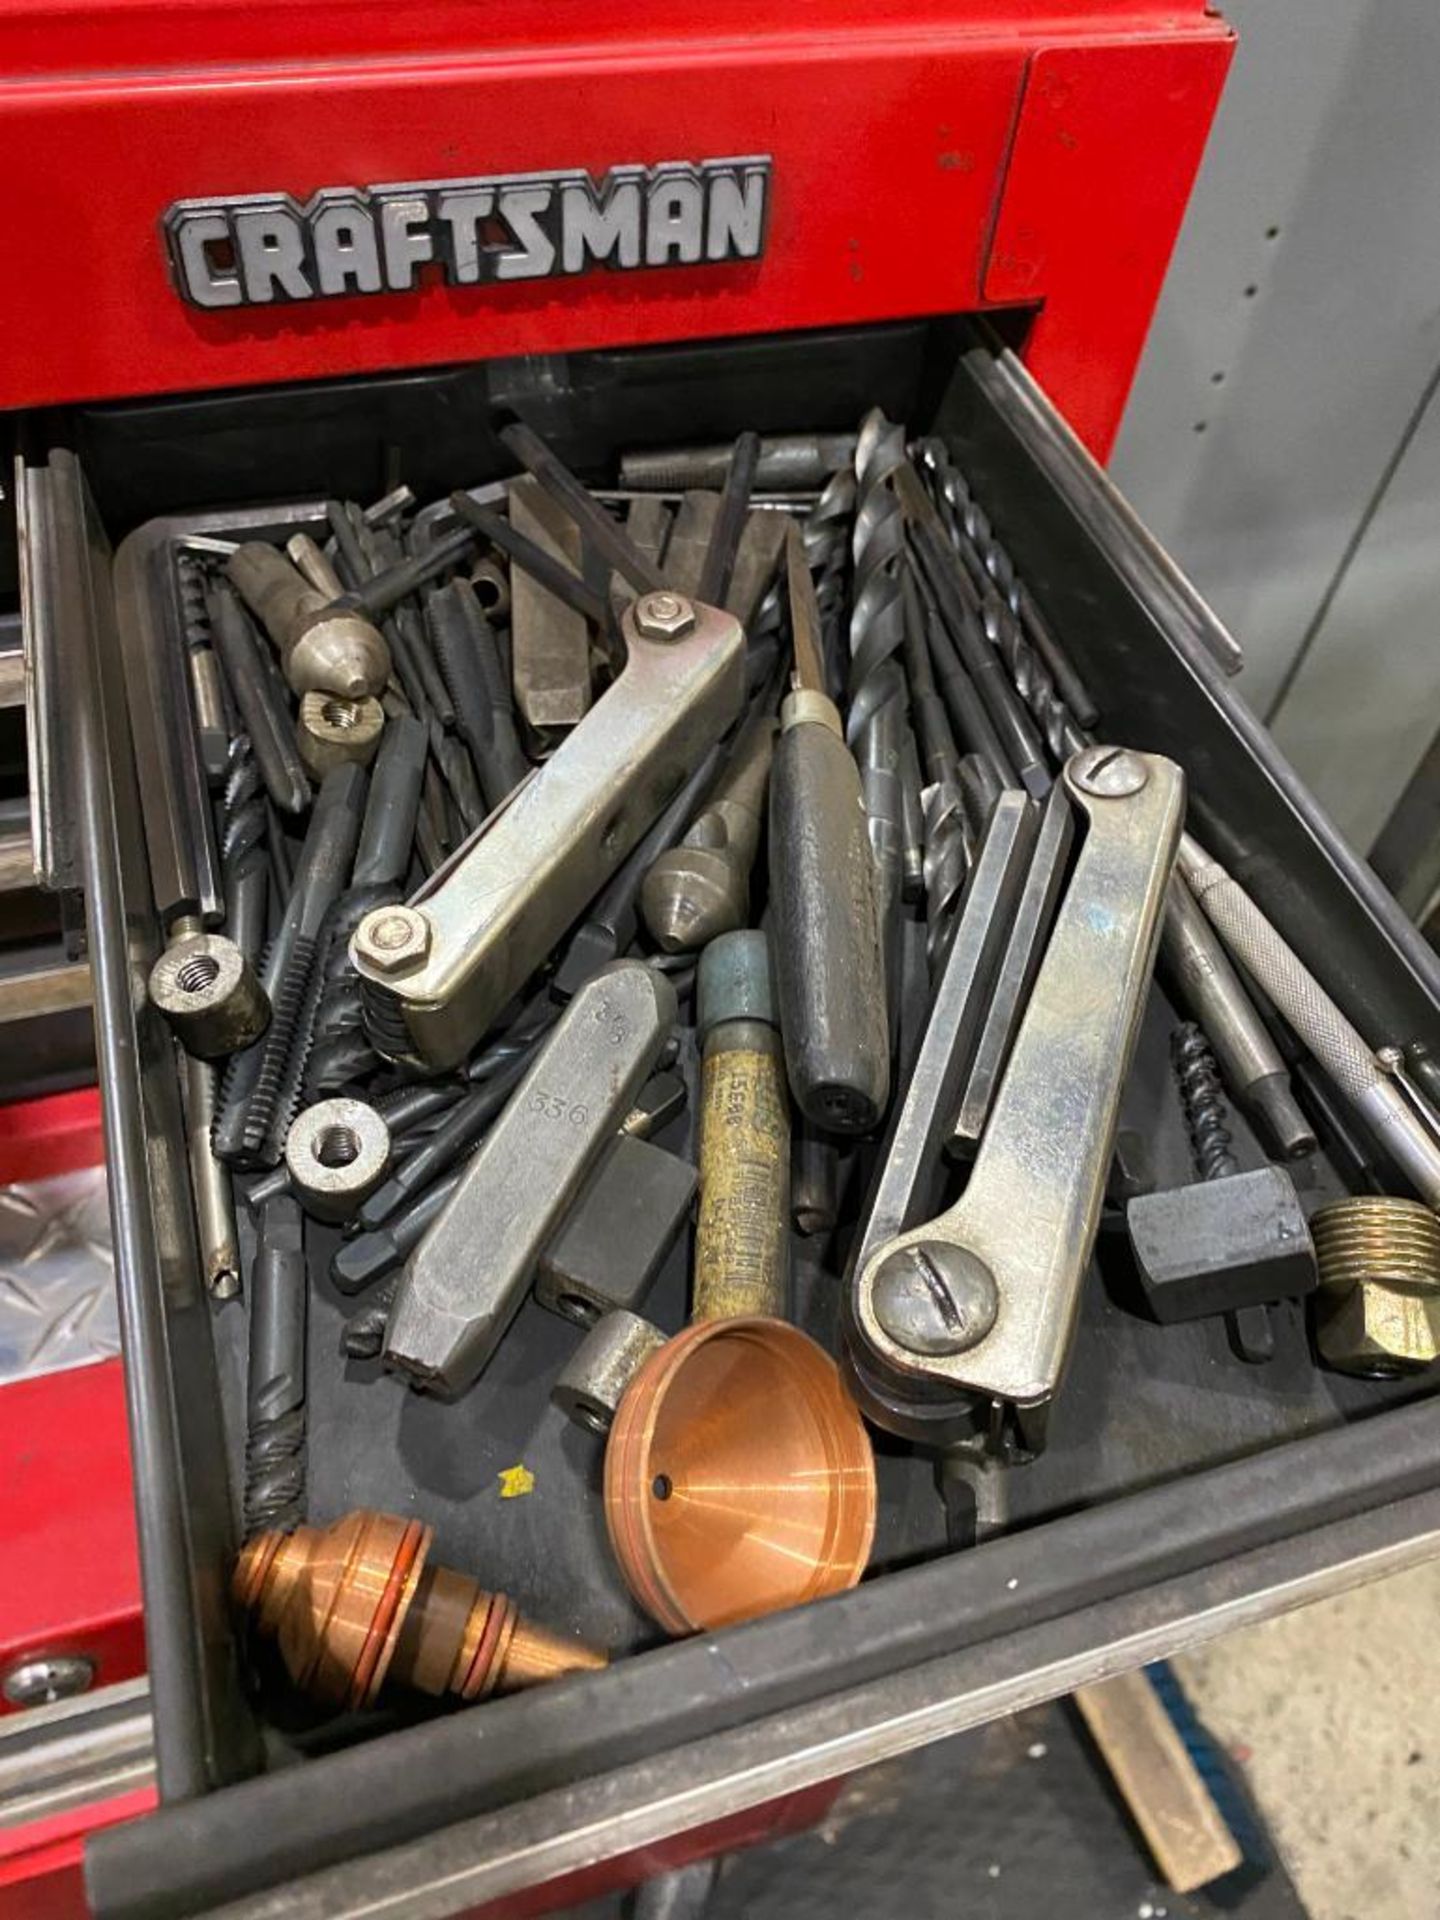 CRAFTSMAN ROLLING TOOLBOX, CONTENTS OF ASSORTED HAND TOOLS - Image 2 of 8